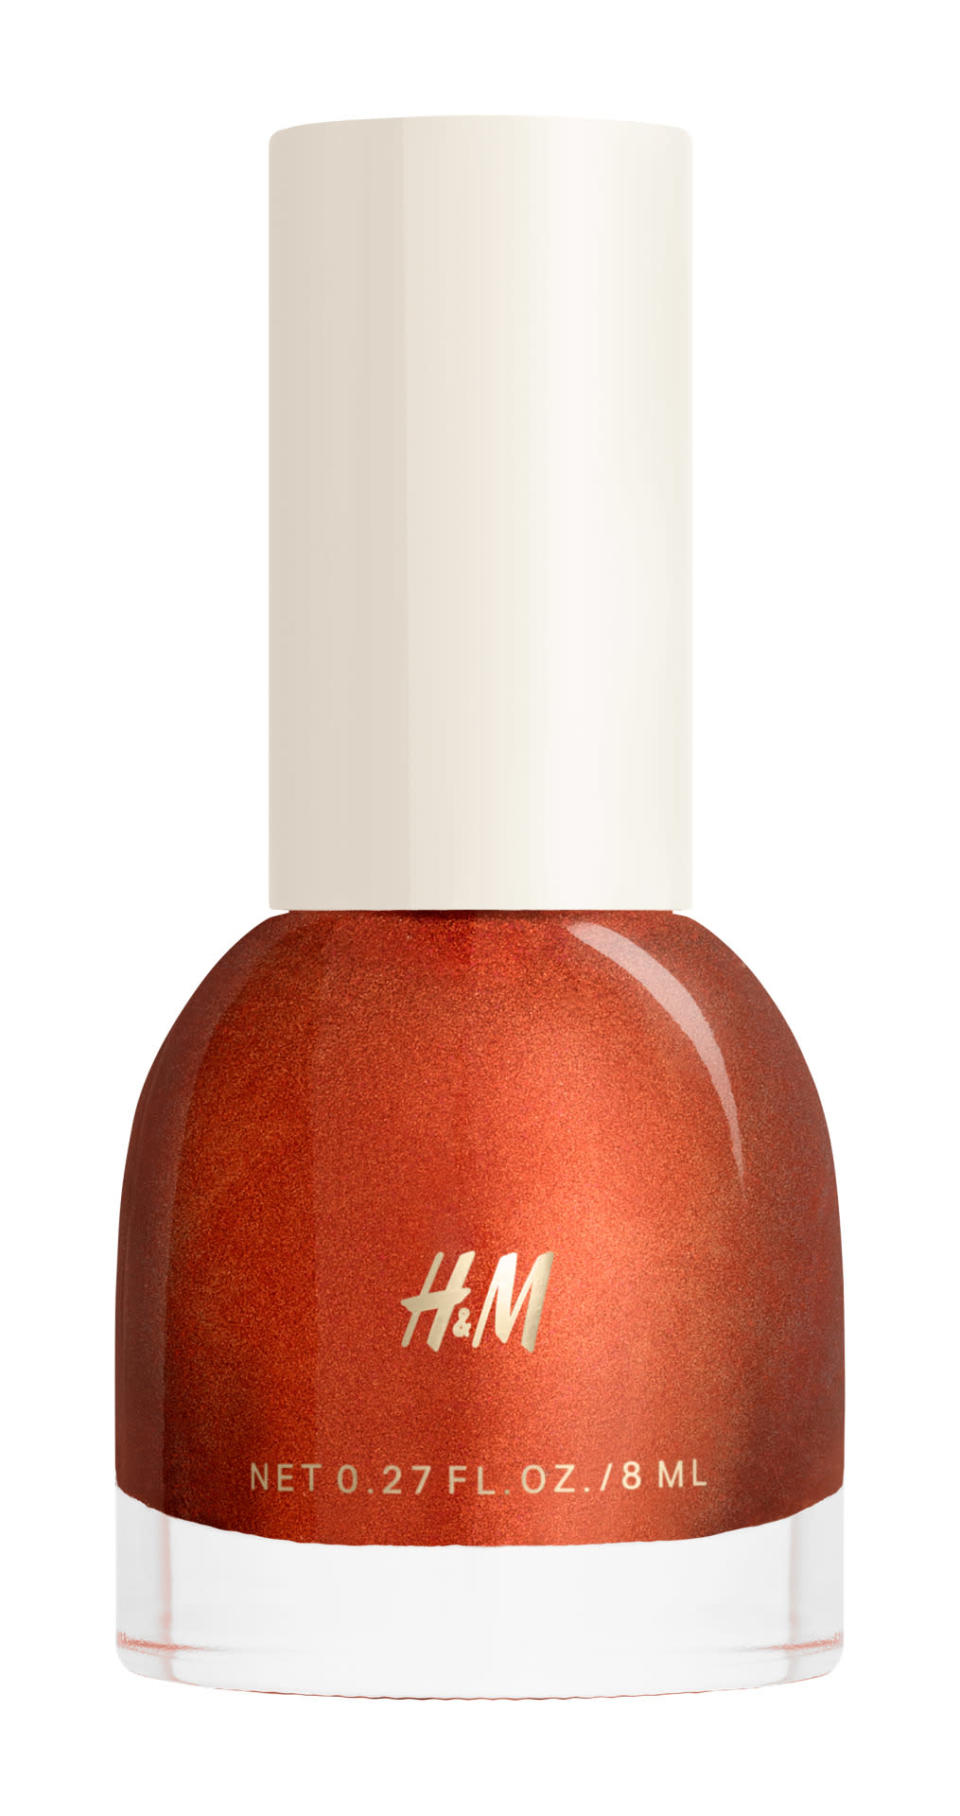 H&M Nail Colour in Russet Spice